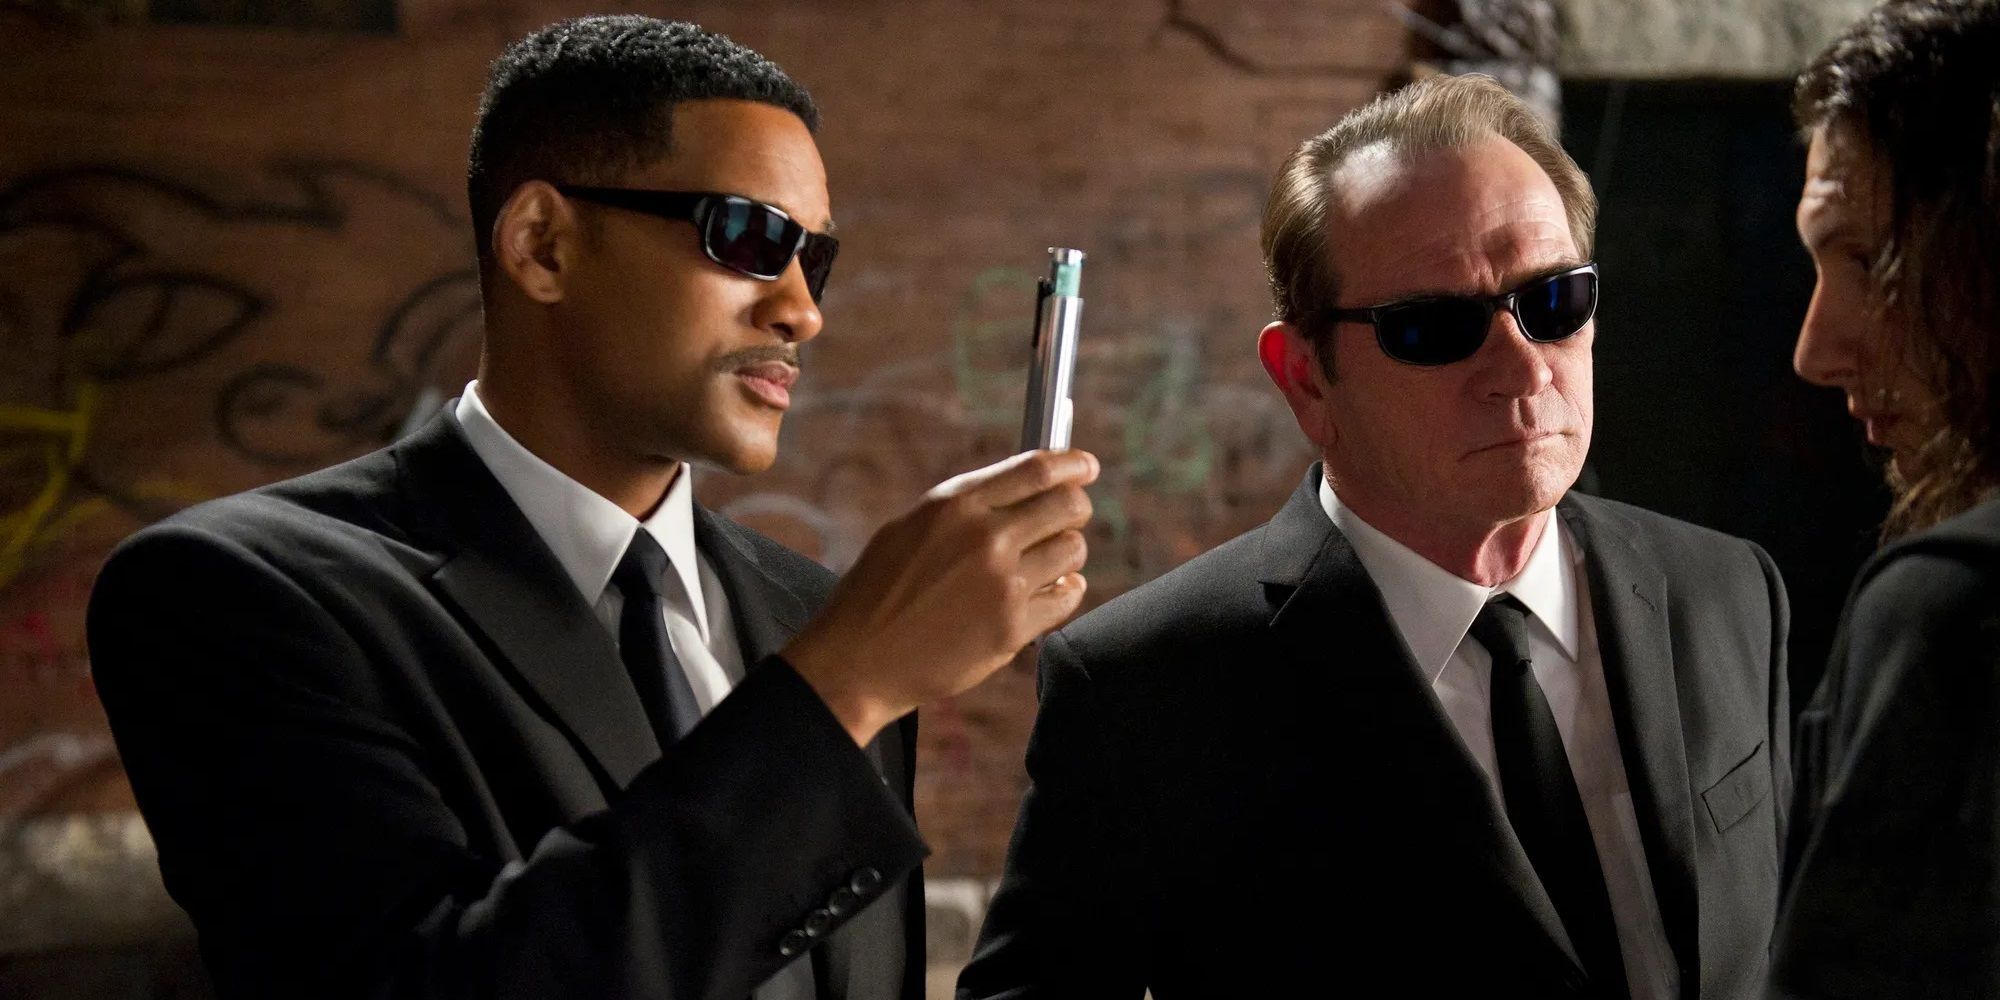 Agent J and Agent K with a neuralizer in Men in Black 3